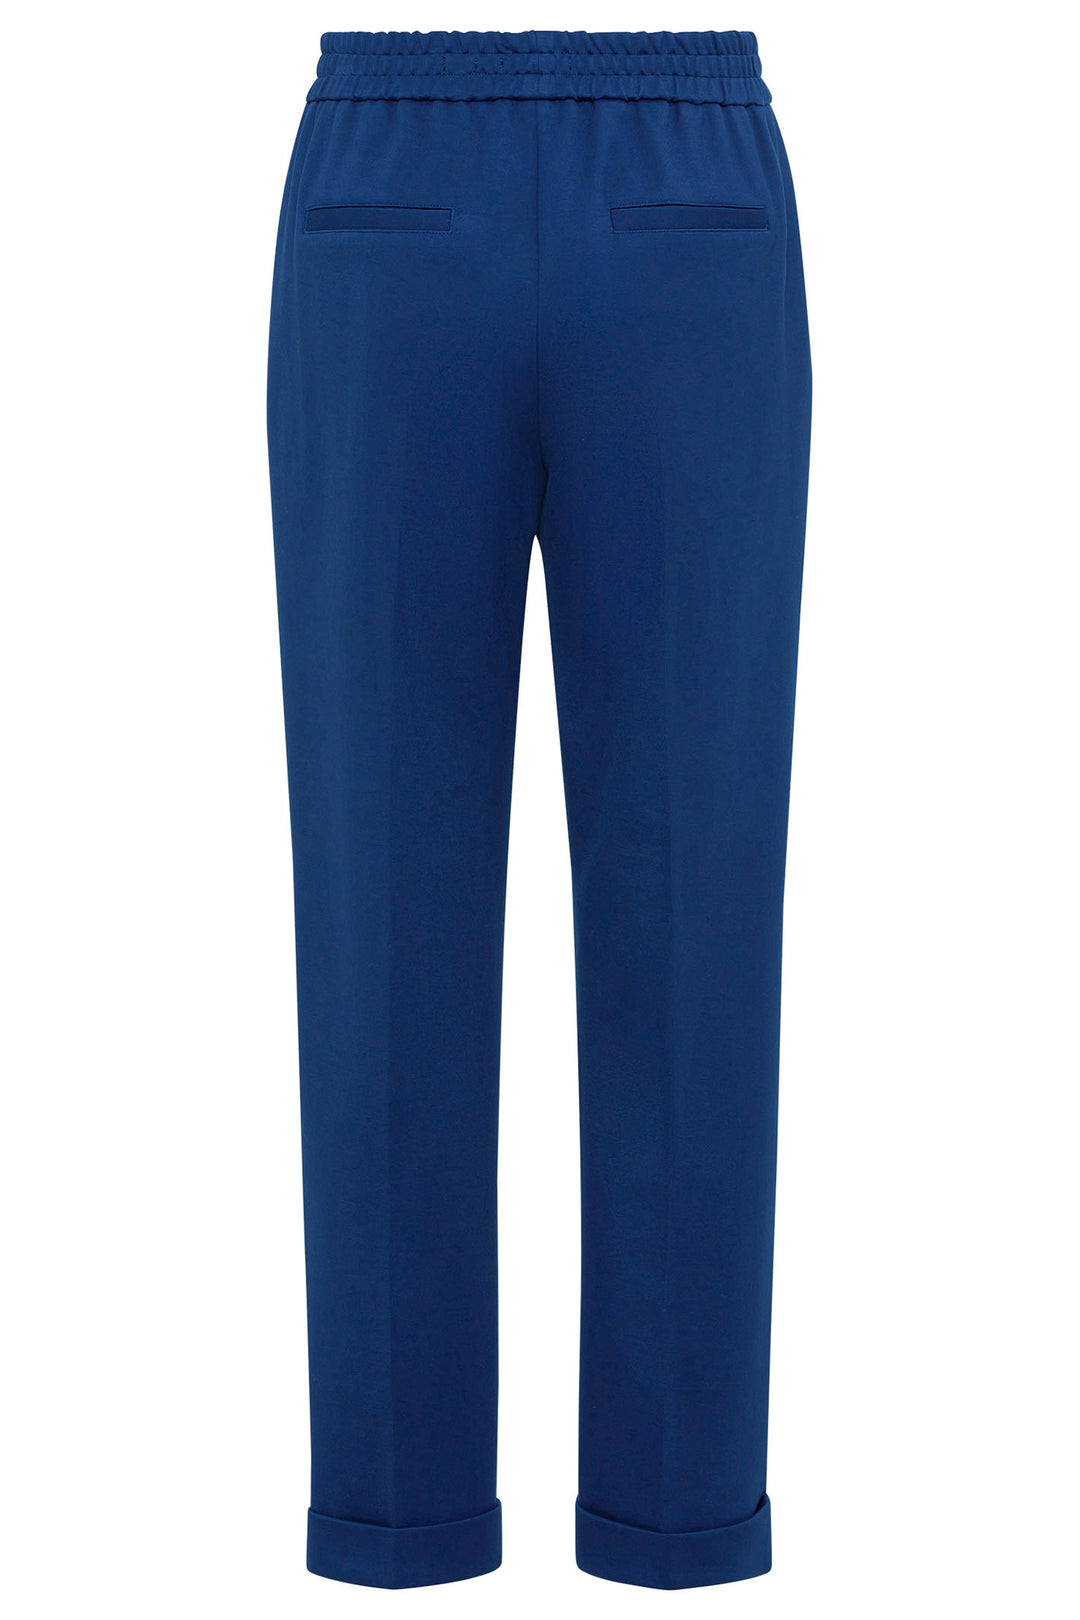 Olsen 14002105 Night Blue Ankle Grazer Pull-On Trousers - Experience Boutique